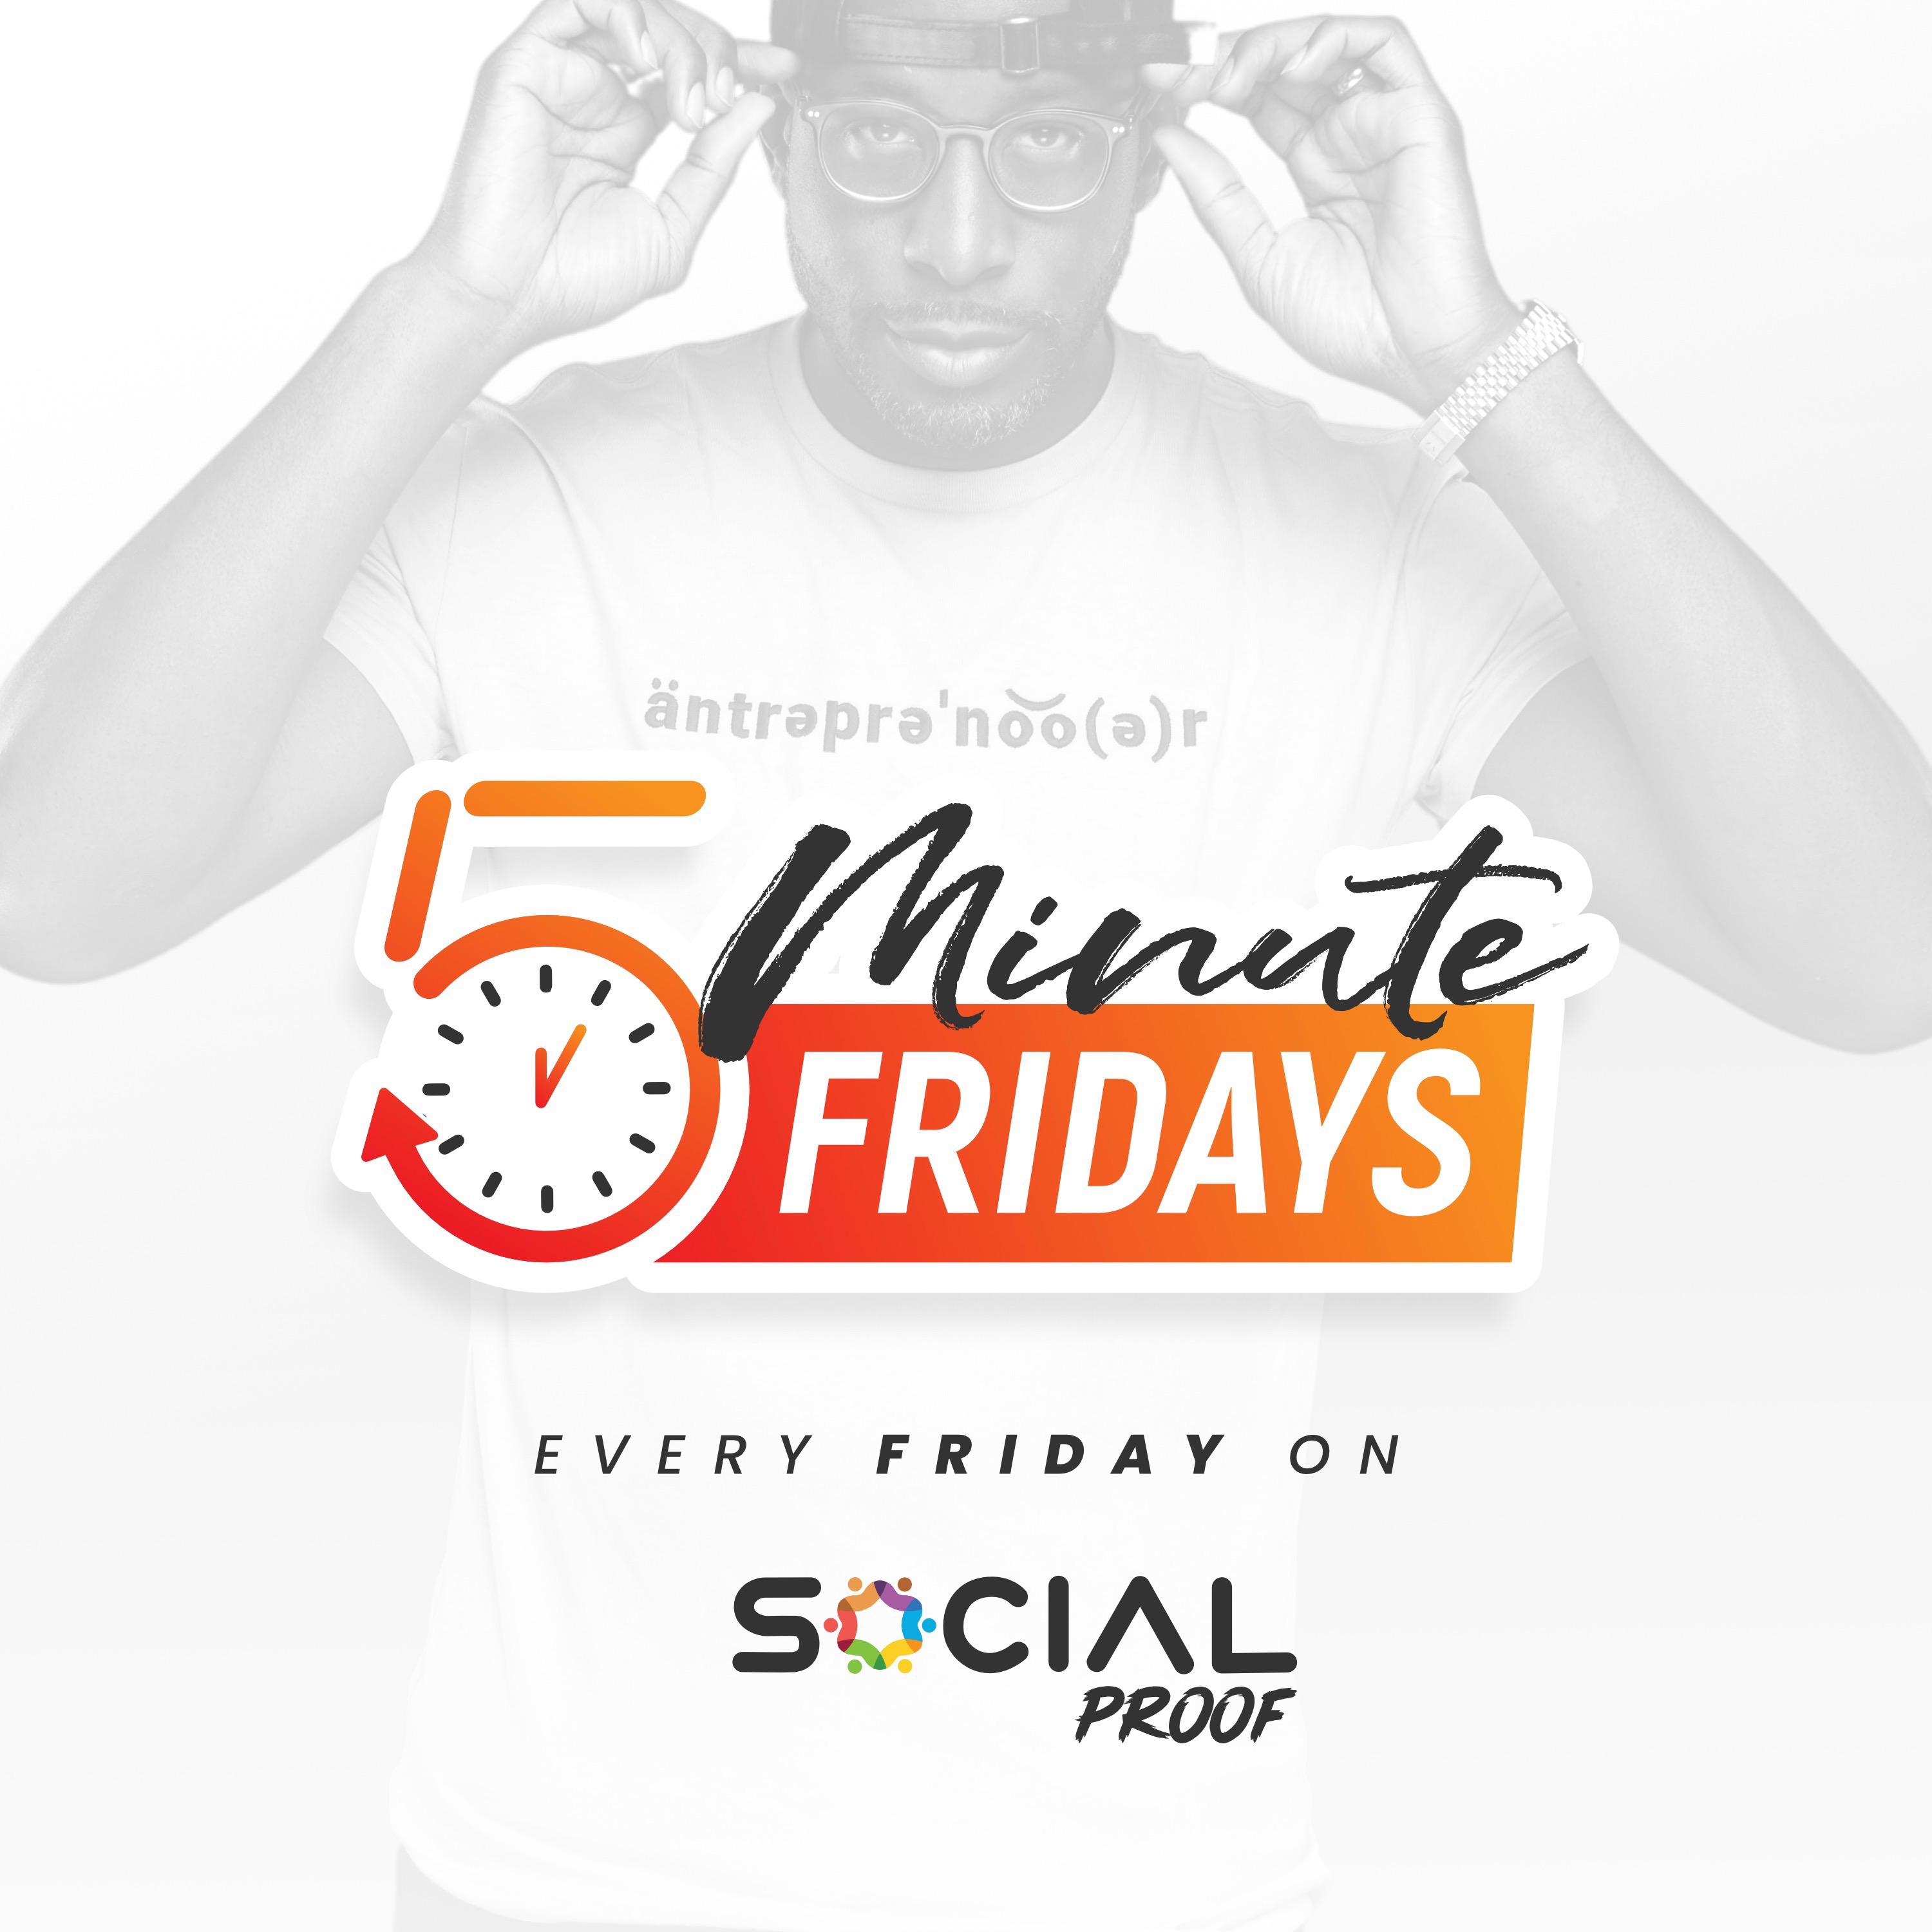 Anything With Longevity Gets Off Course -5 MINUTE FRIDAYS